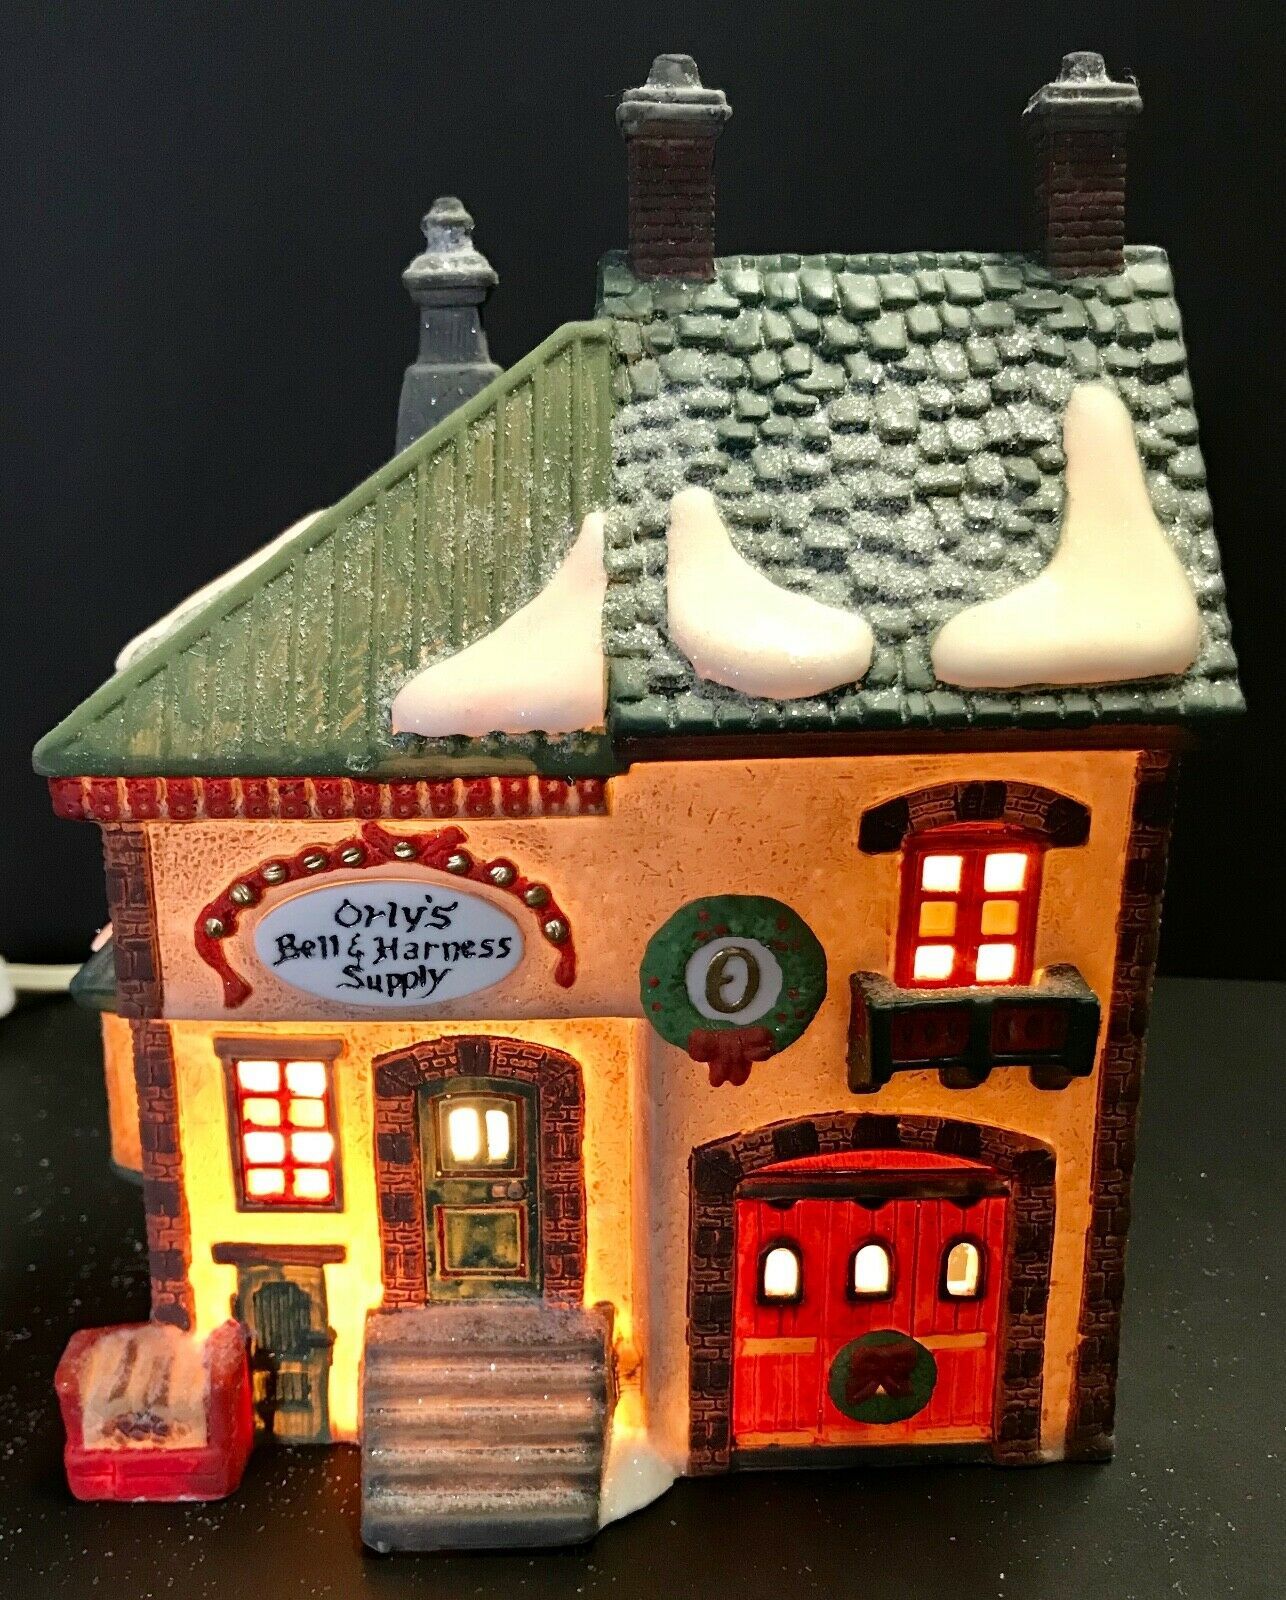 Dept 56 North Pole Series #56219 ORLY'S BELL & HARNESS SUPPLY Lighted Building - $34.94